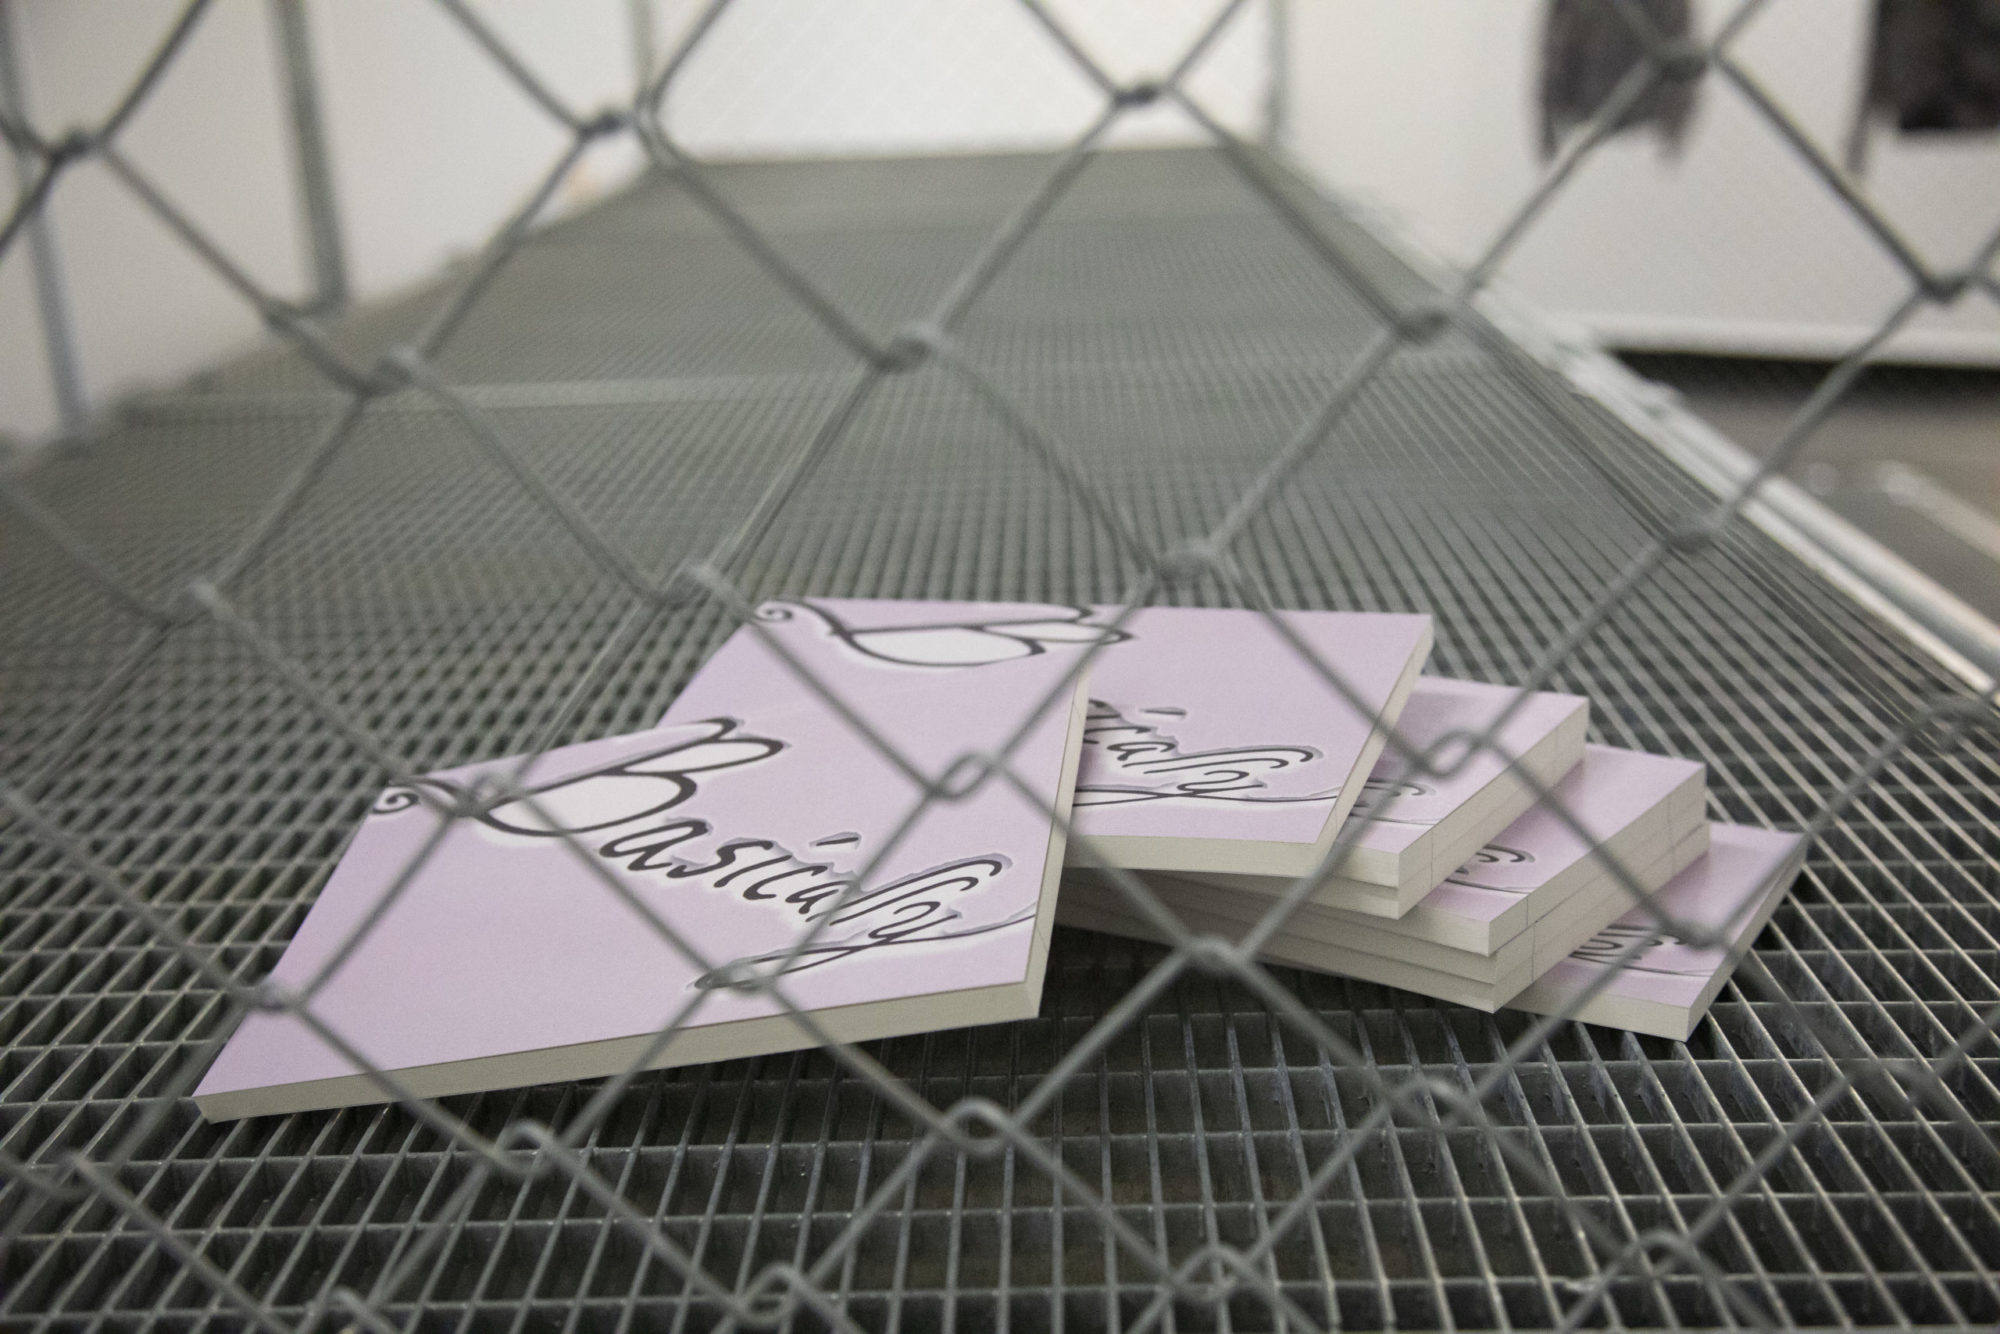 Through a chain link fence, a splayed out stack of lavender squares with basically written on them are in view. There are eight in the stack.